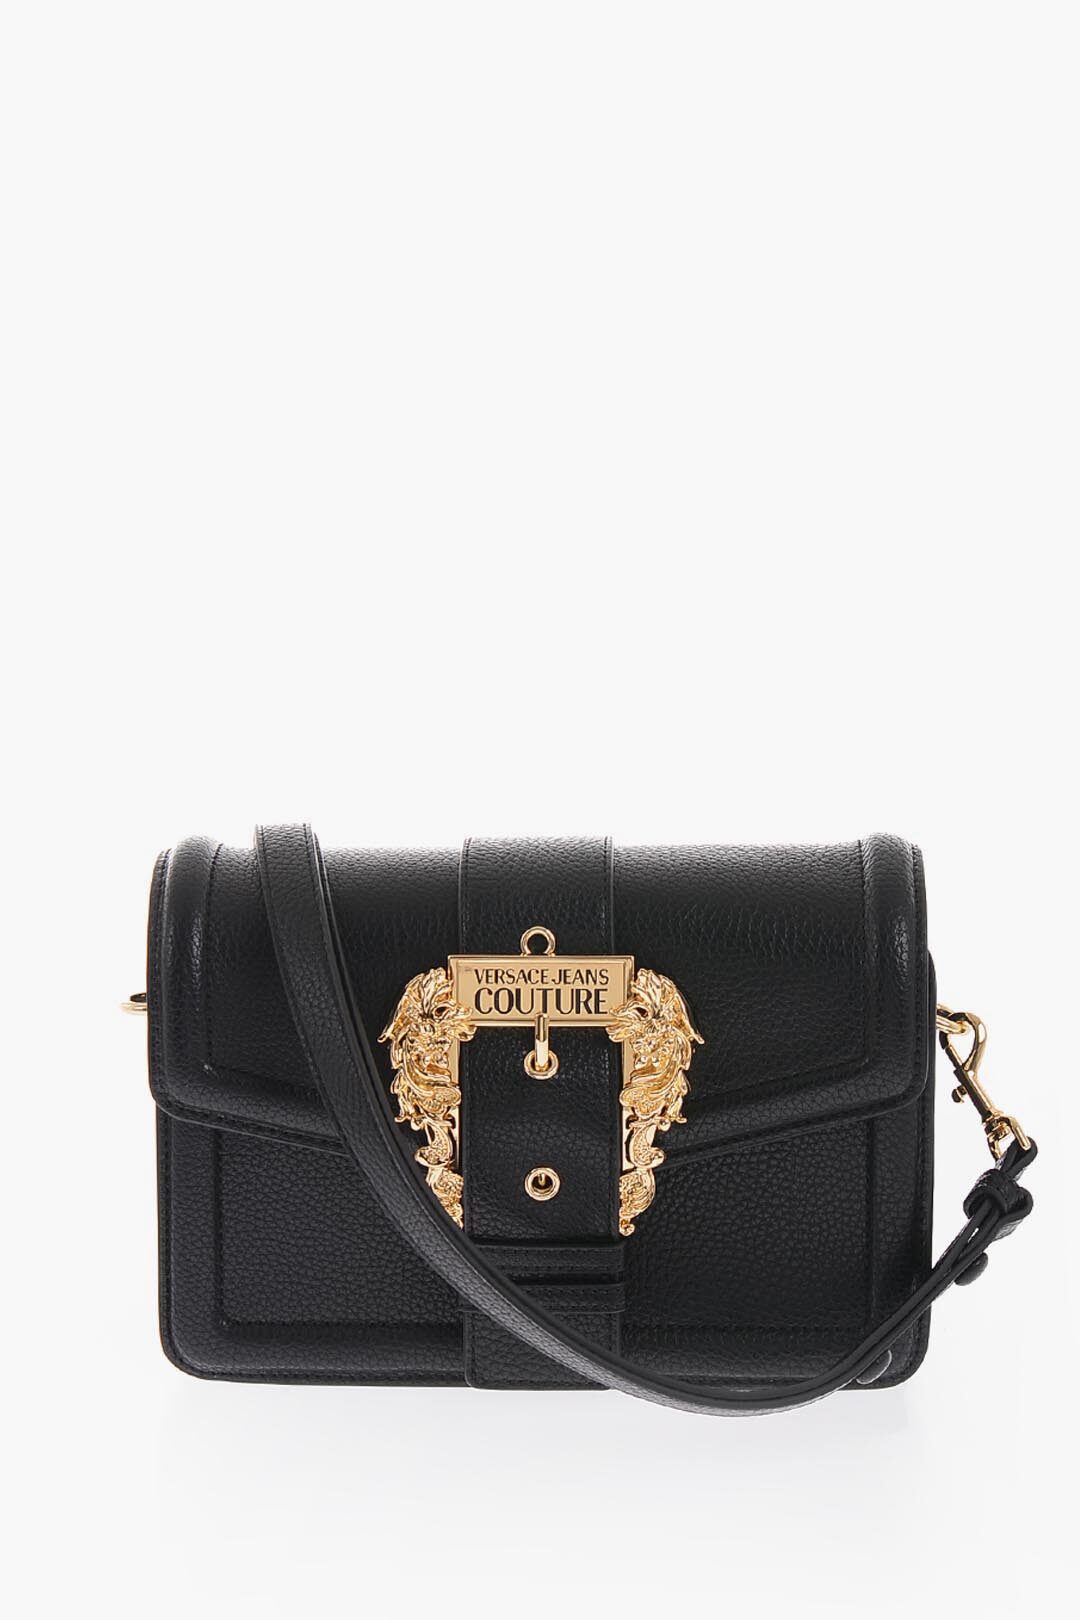 Versace JEANS COUTURE Faux Leather Shoulder Bag with Golden Buckle women -  Glamood Outlet